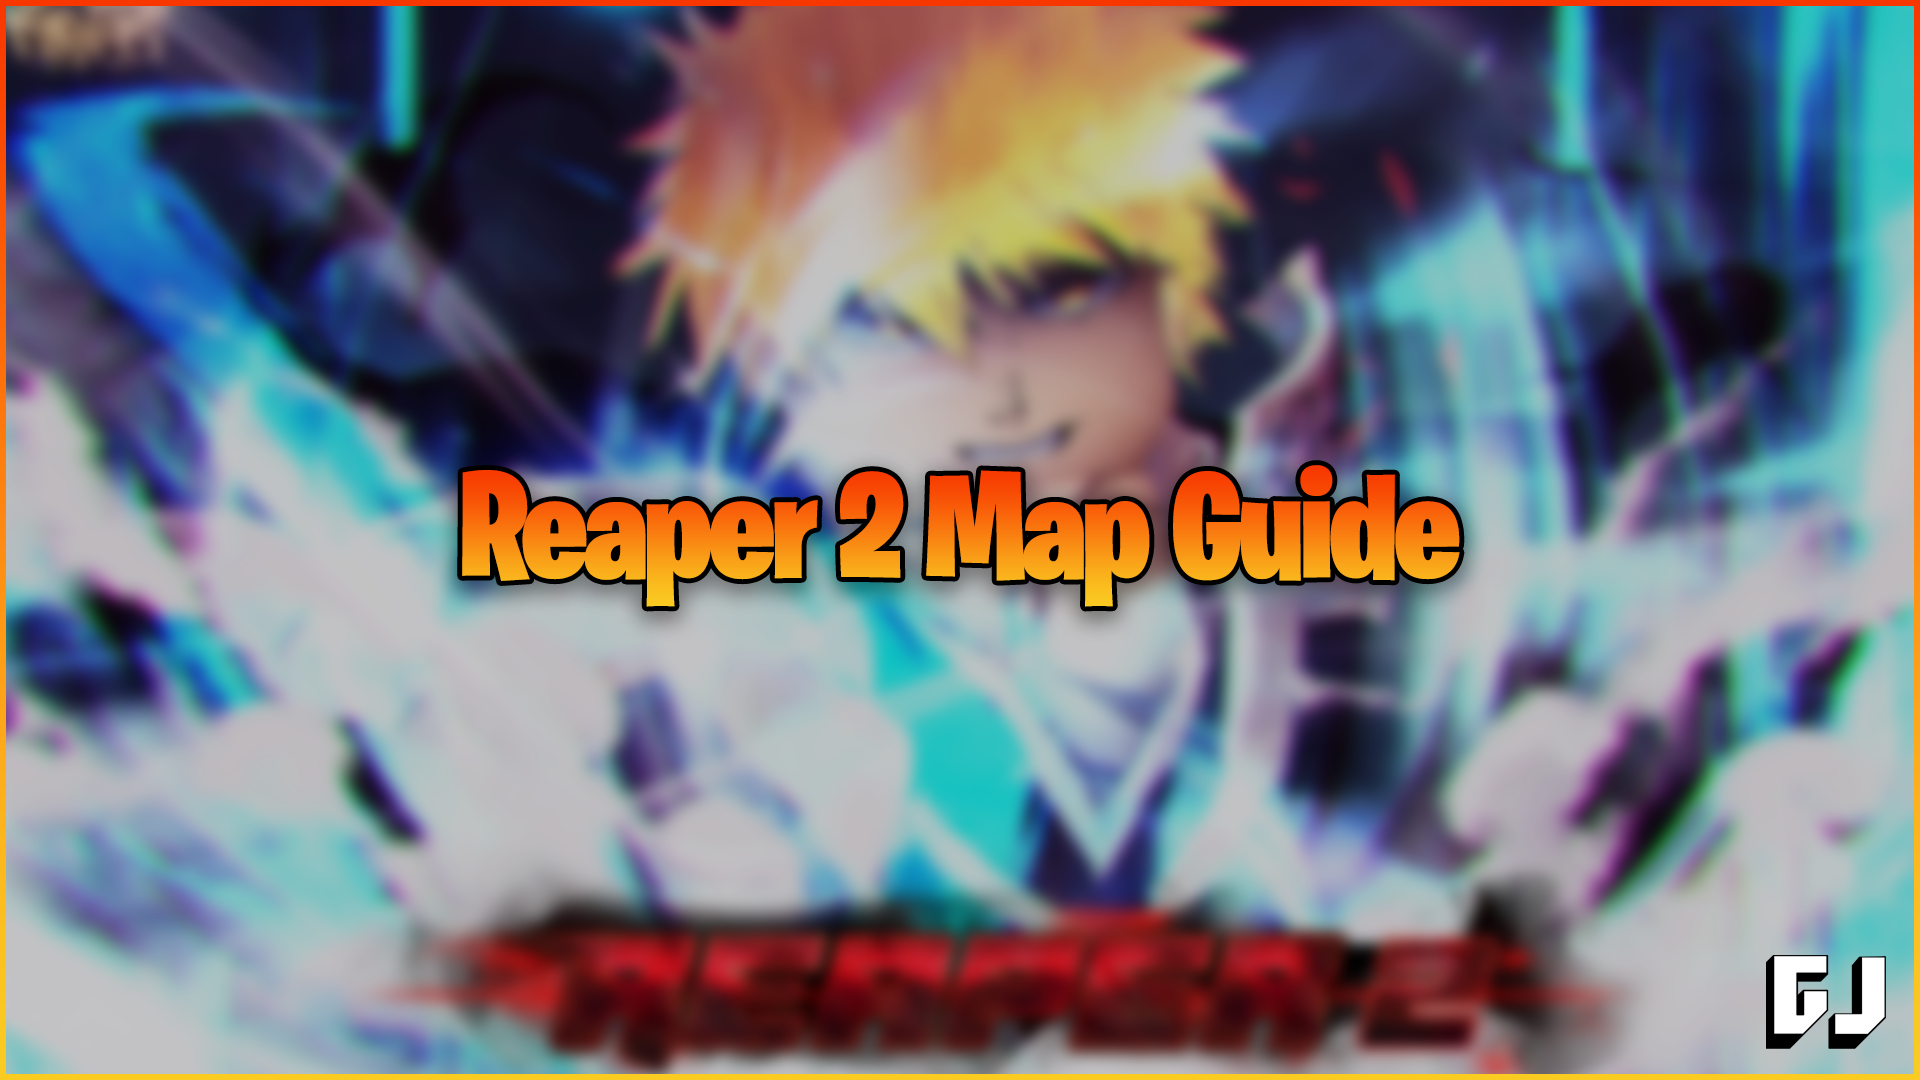 REAPER 2 IS THE NEW BLEACH GAME ON ROBLOX 